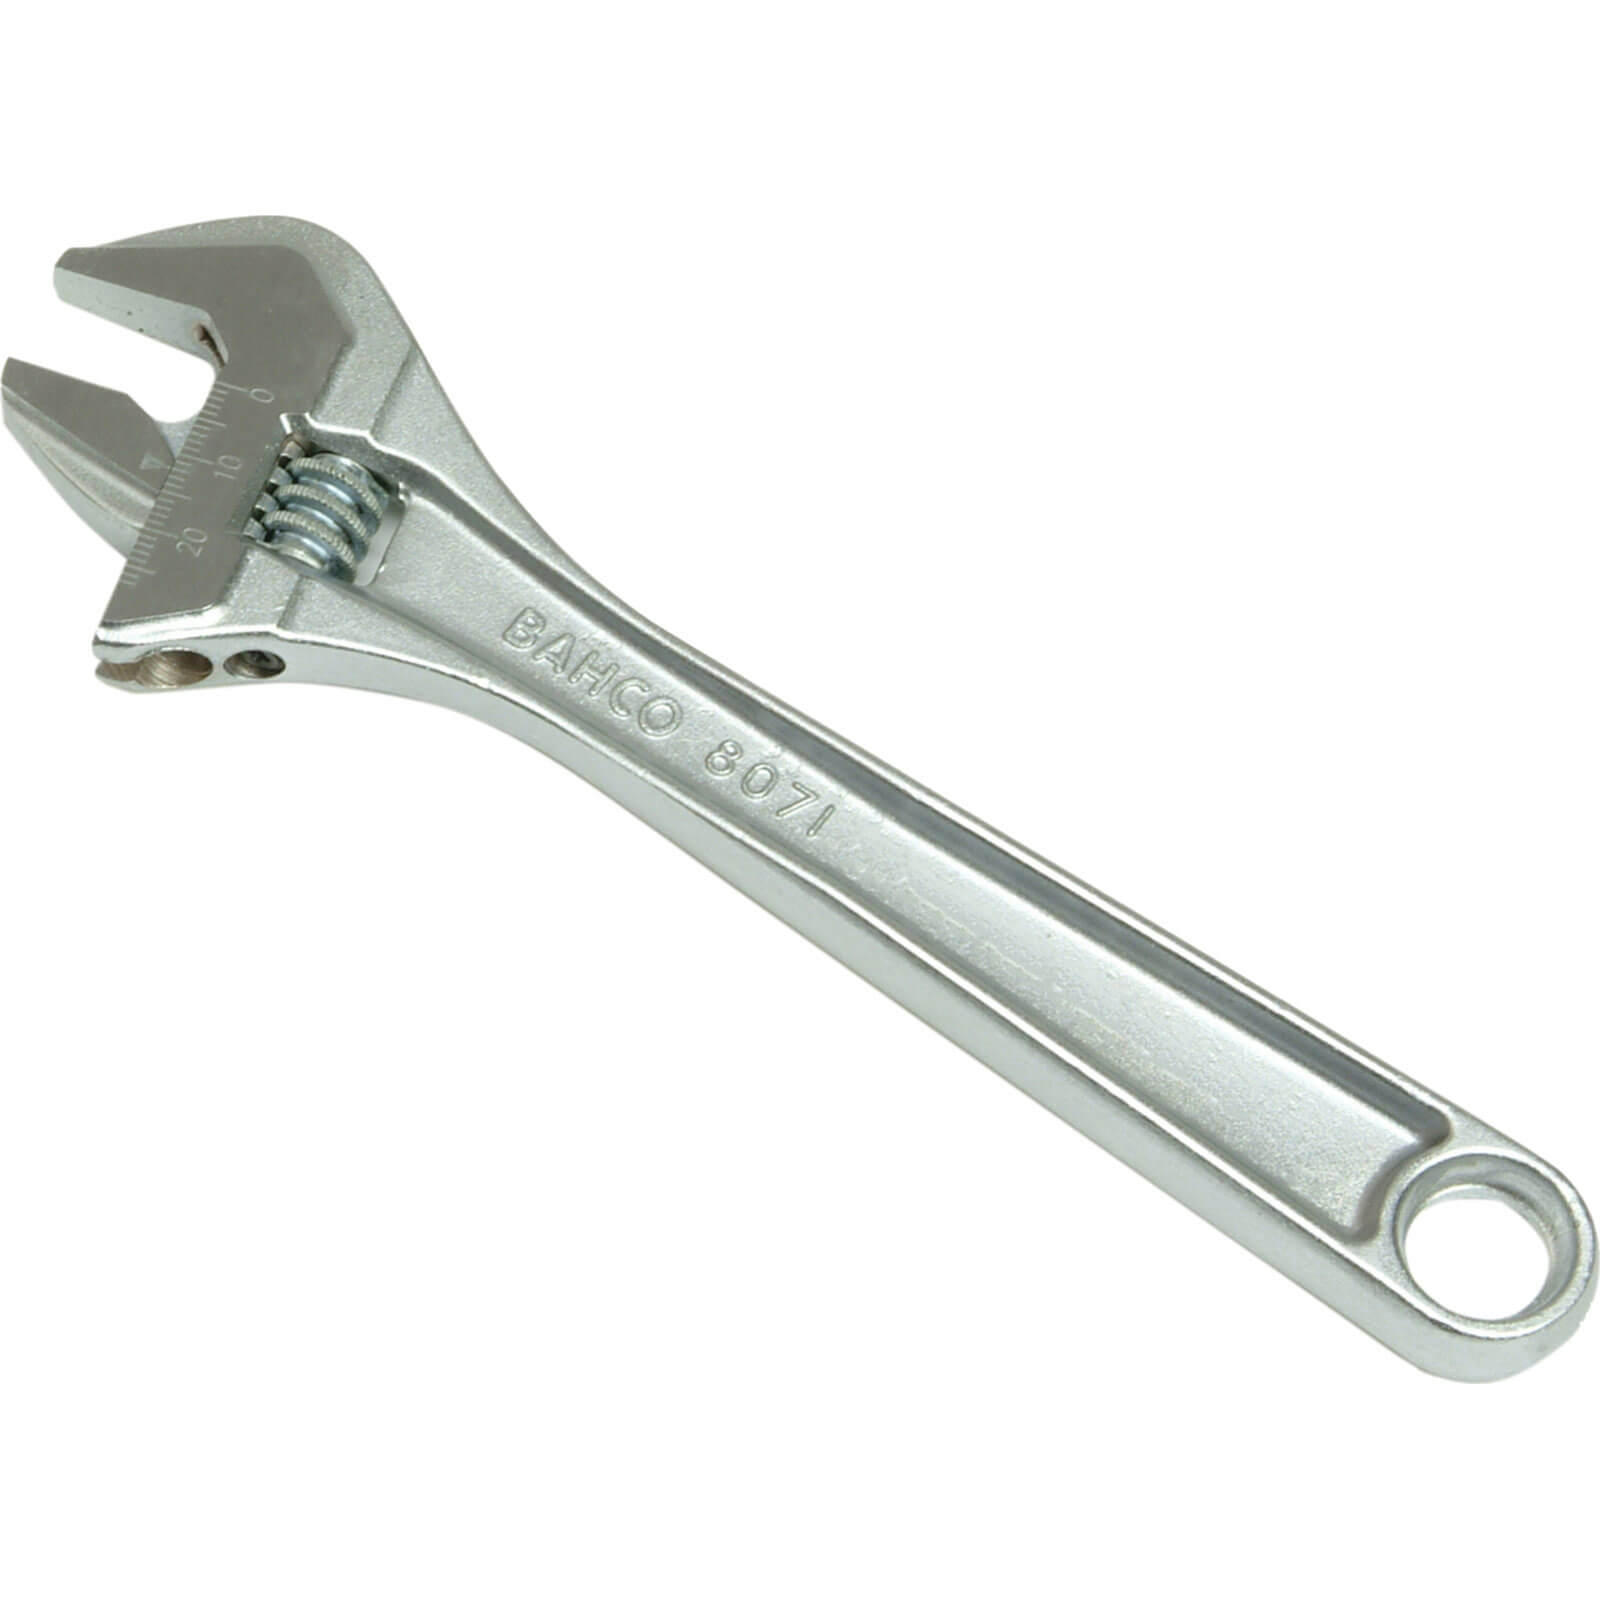 Photo of Bahco 80 Series Adjustable Spanner 250mm